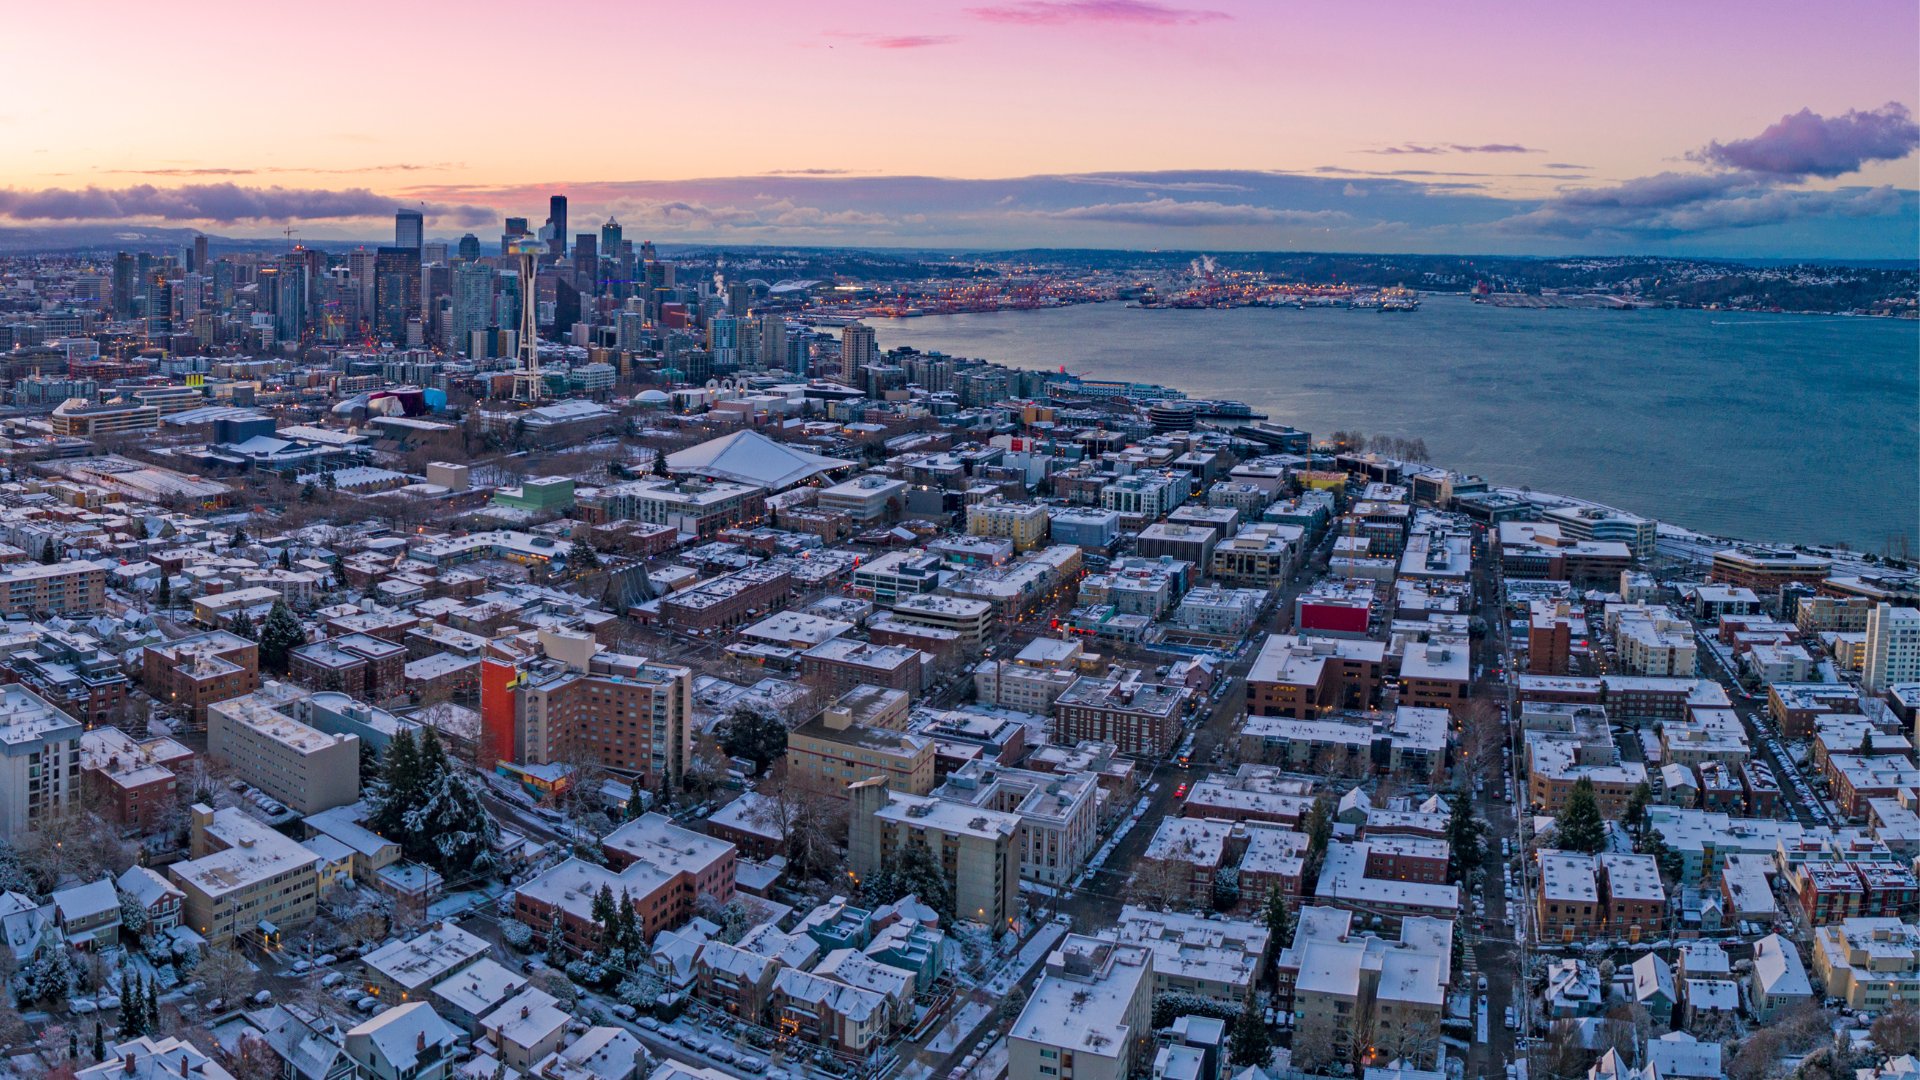 A panoramic view of downtown Seattle, Belltown, Uptown, and Elliott Bay, with snow-covered rooftops and a cold-looking sunset.